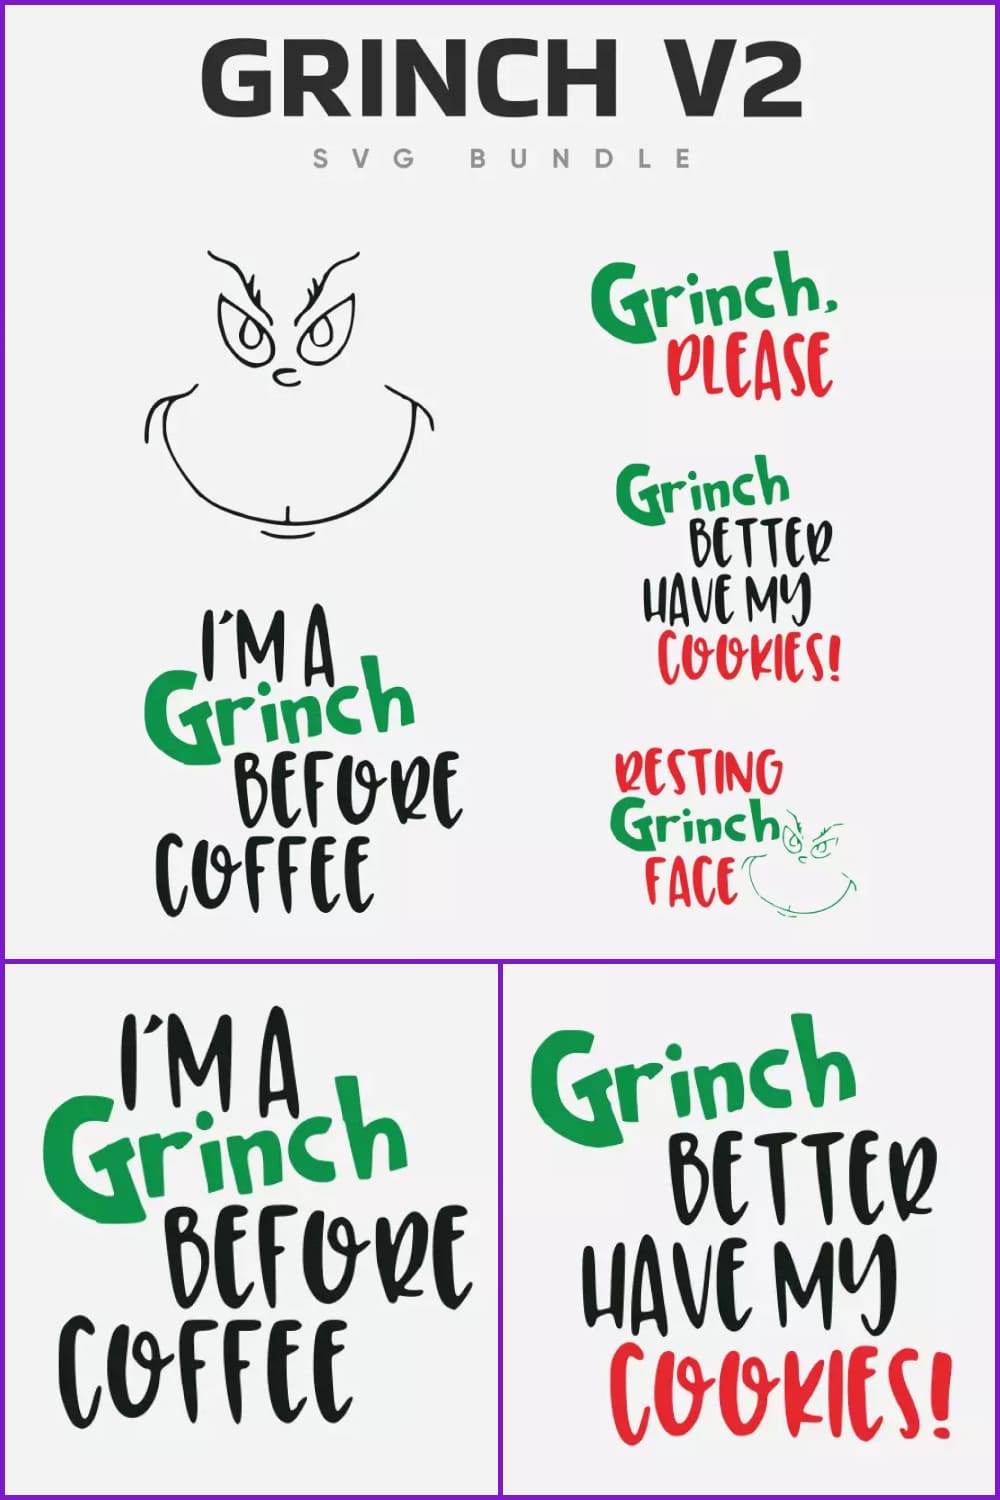 Grinch signs in blach, green and red colors.